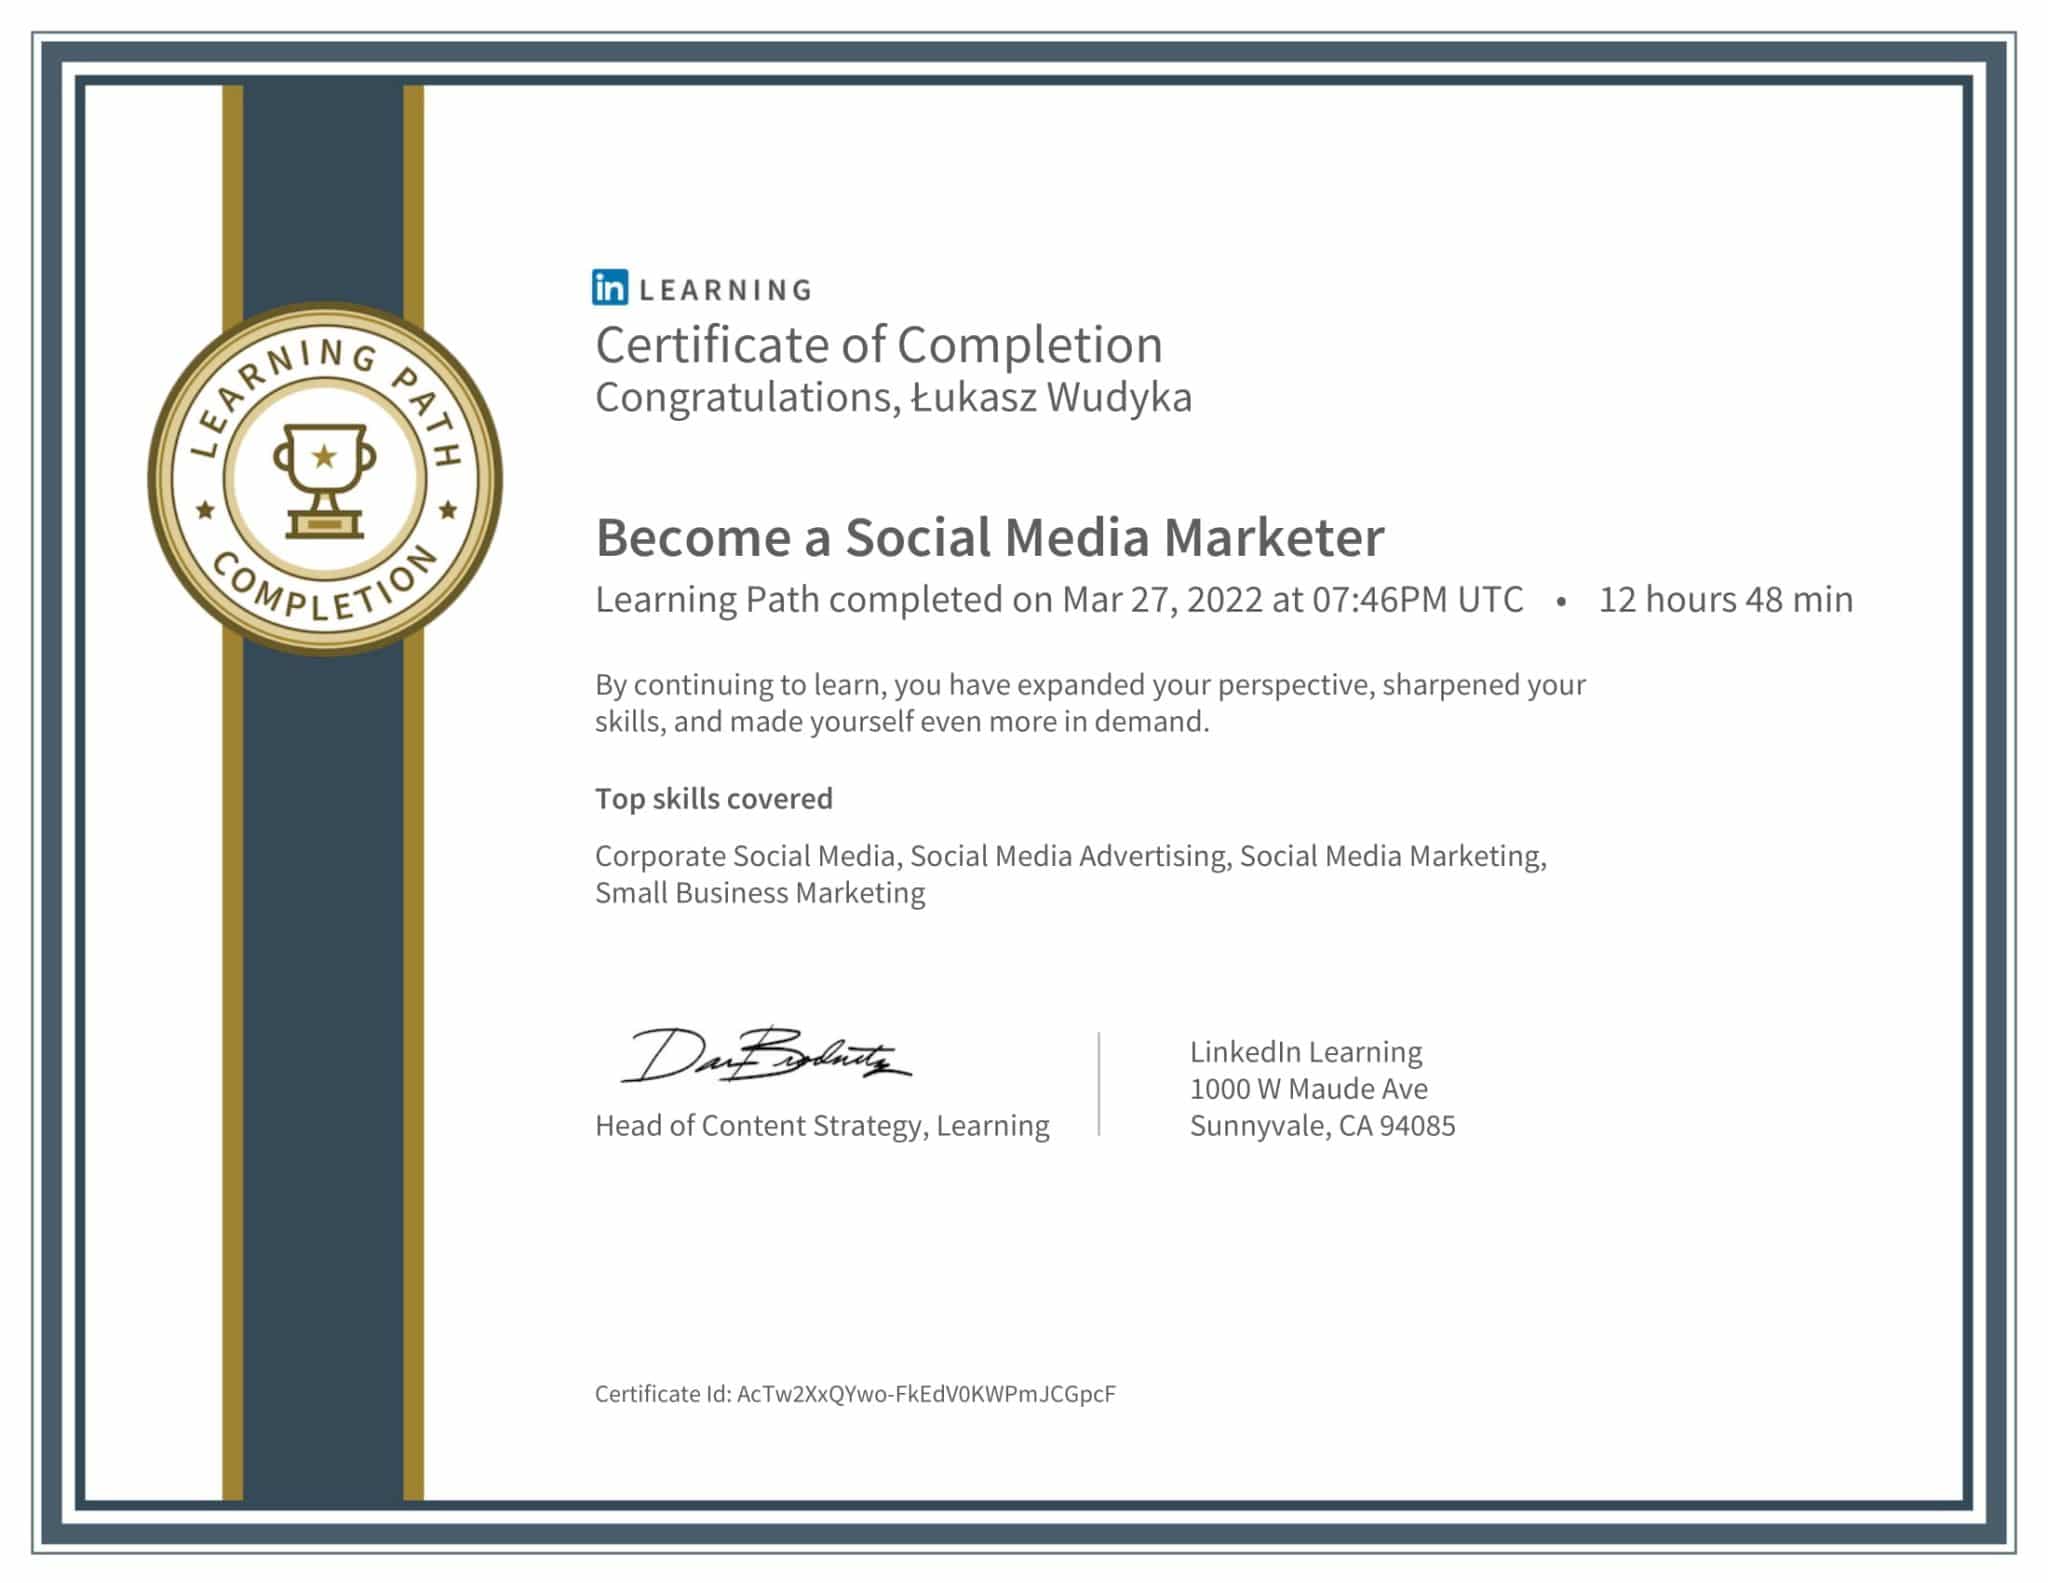 CertificateOfCompletion_Become a Social Media Marketer-1